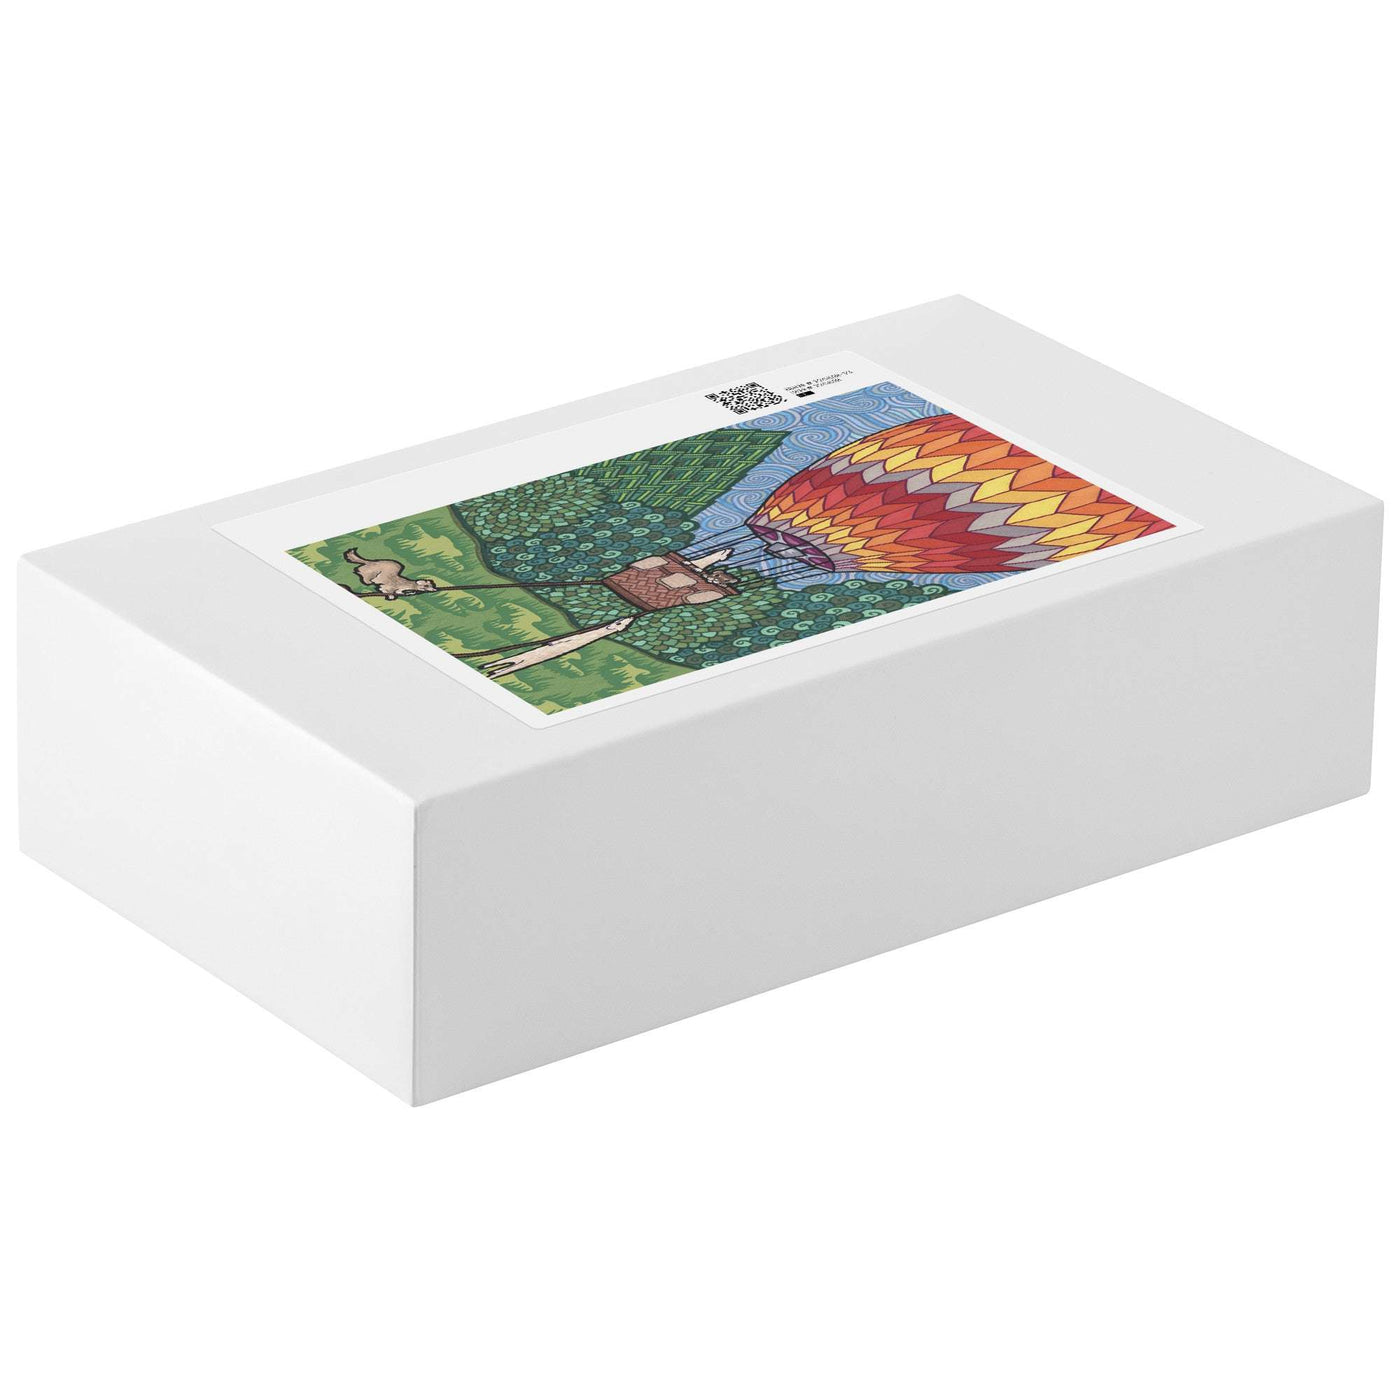 White rectangular box with a colorful image of a Ferret Flight Puzzle on its lid.